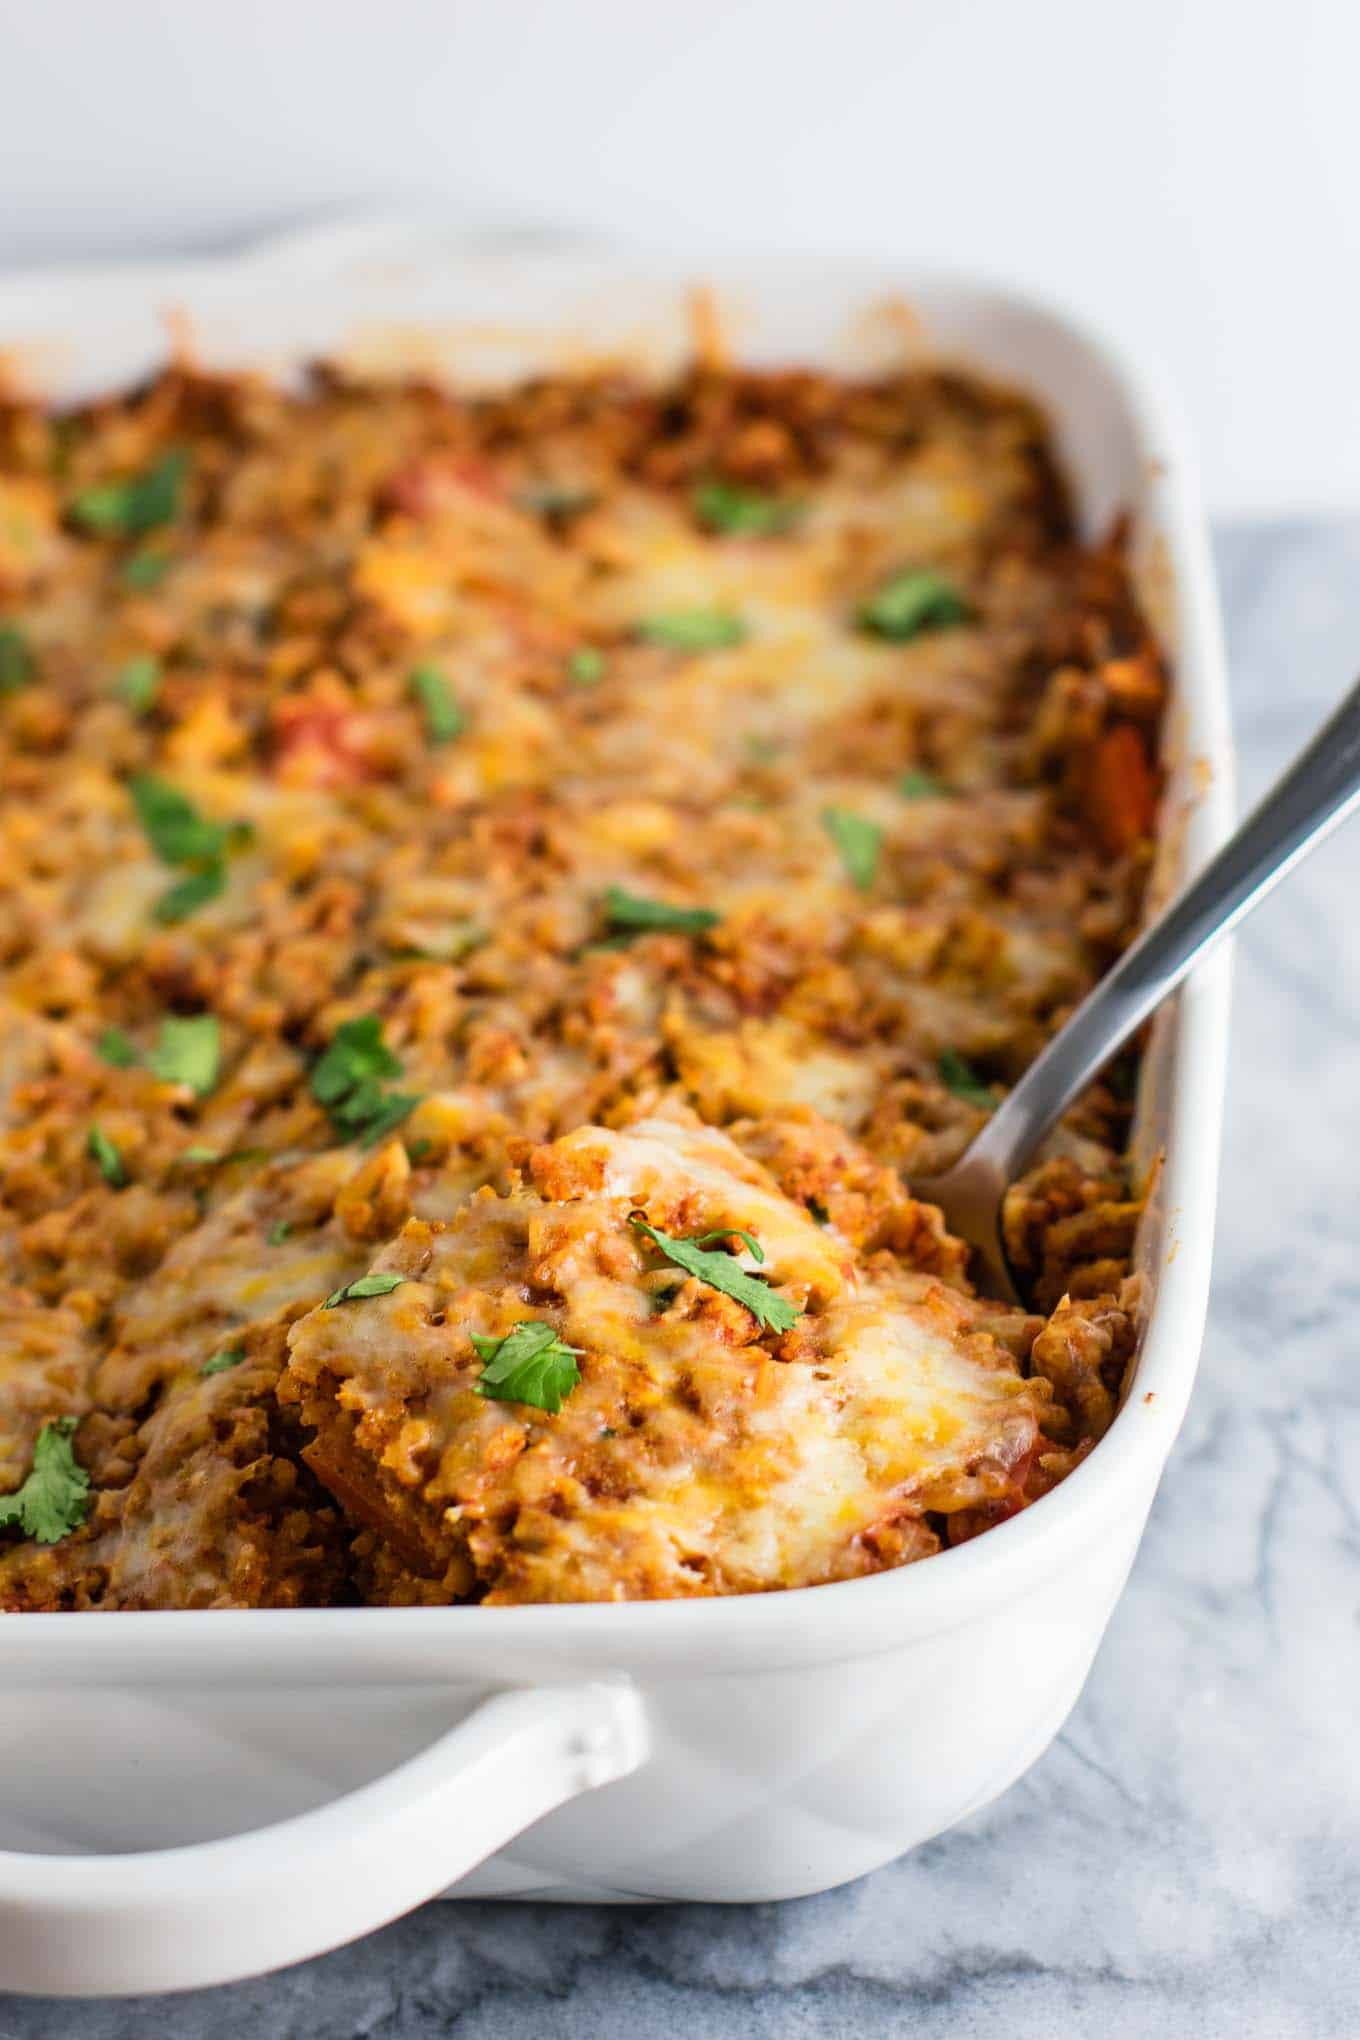 The 25 Best Ideas for tofu Casseroles Recipes - Home, Family, Style and ...